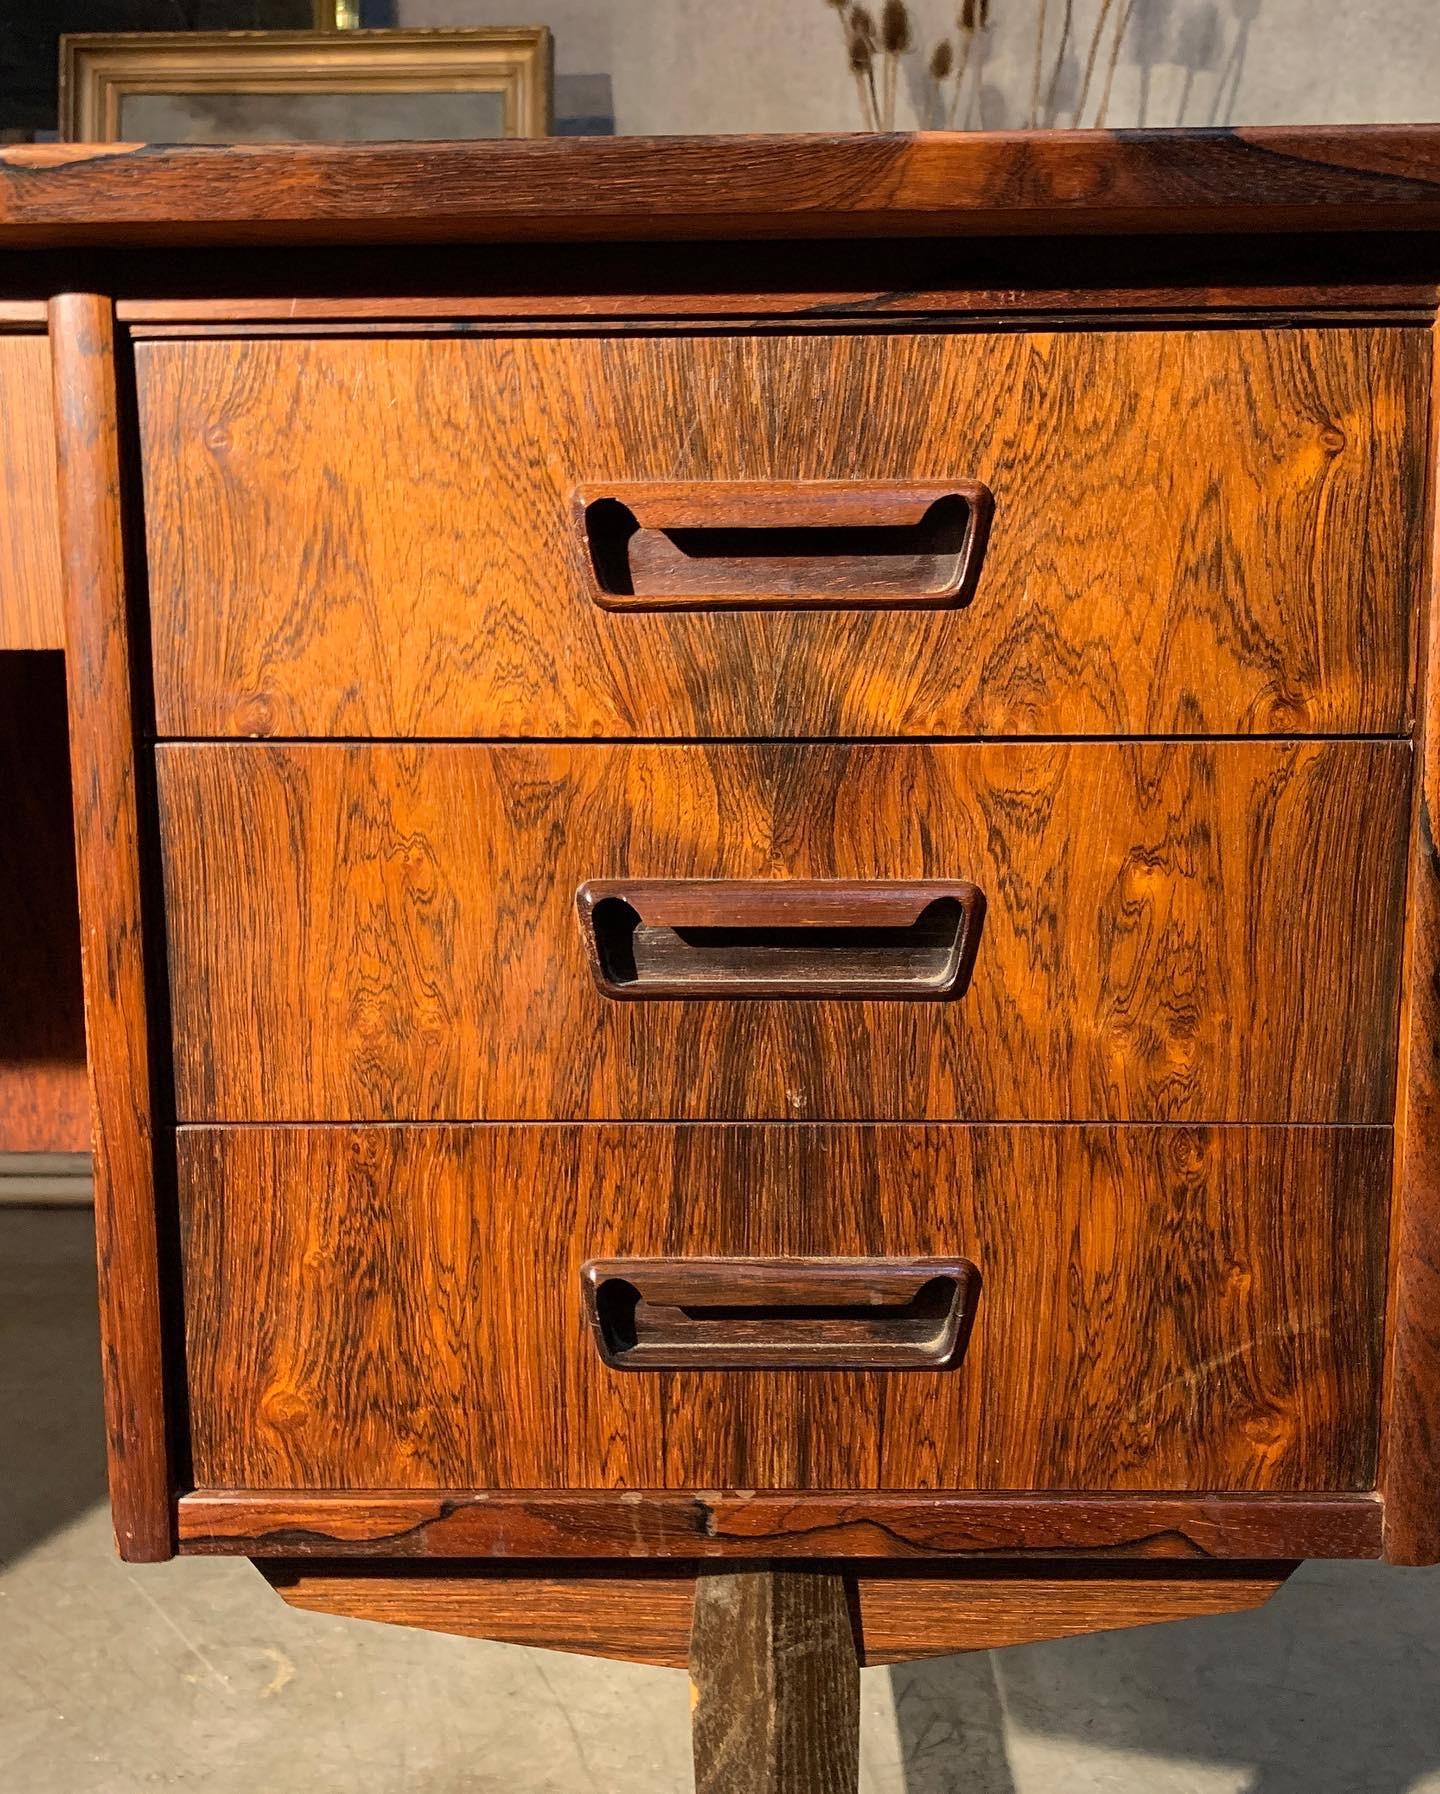 Strong rosewood in this Danish piece maker currently not confirmed. Locking drawers and front compartment.